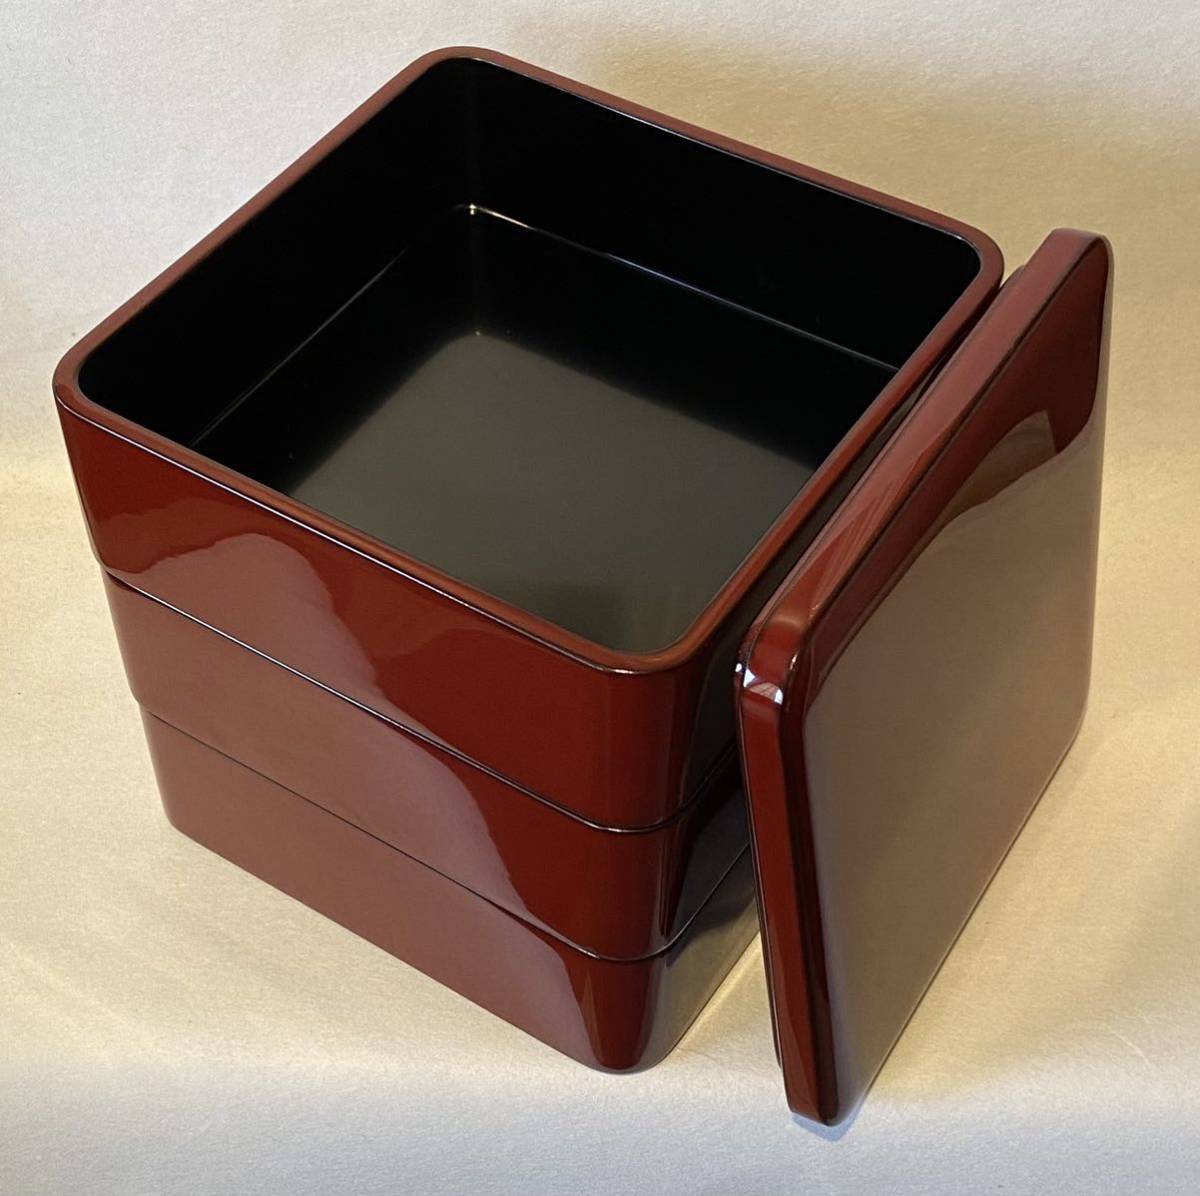  Echizen lacquer ware # Echizen paint three step -ply 5.0 multi-tiered food box old fee .* domestic production * natural tree *book@ lacquer [ new goods ]